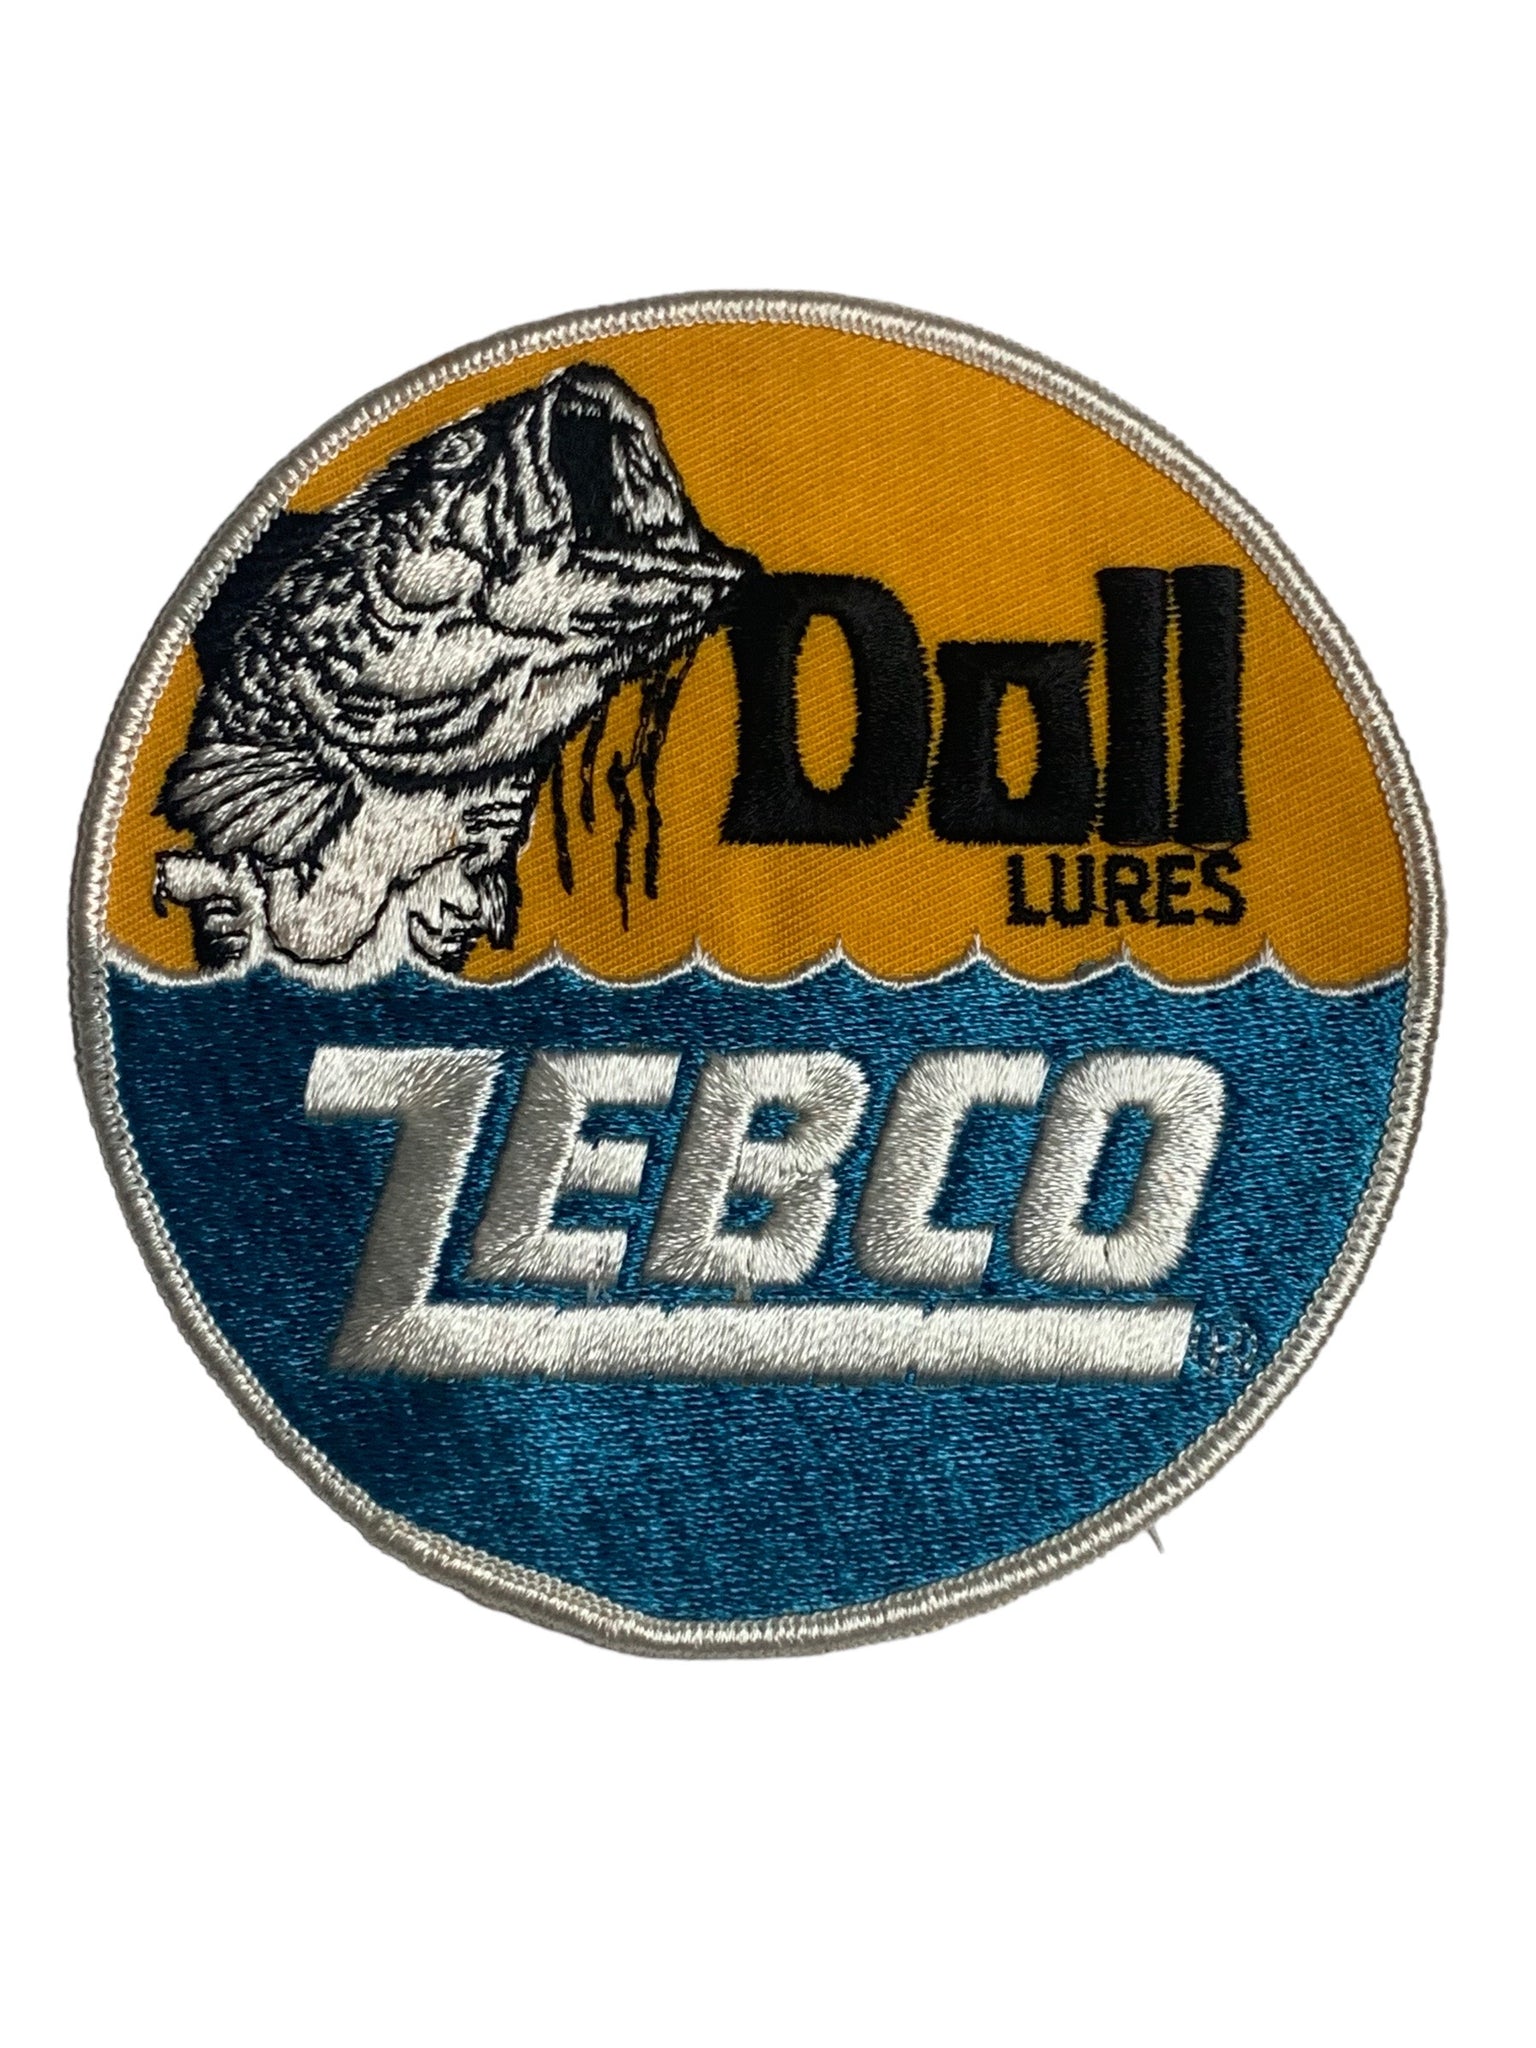 DOLL LURES ZEBCO Vintage Patch • JUMPING BASS – Toad Tackle